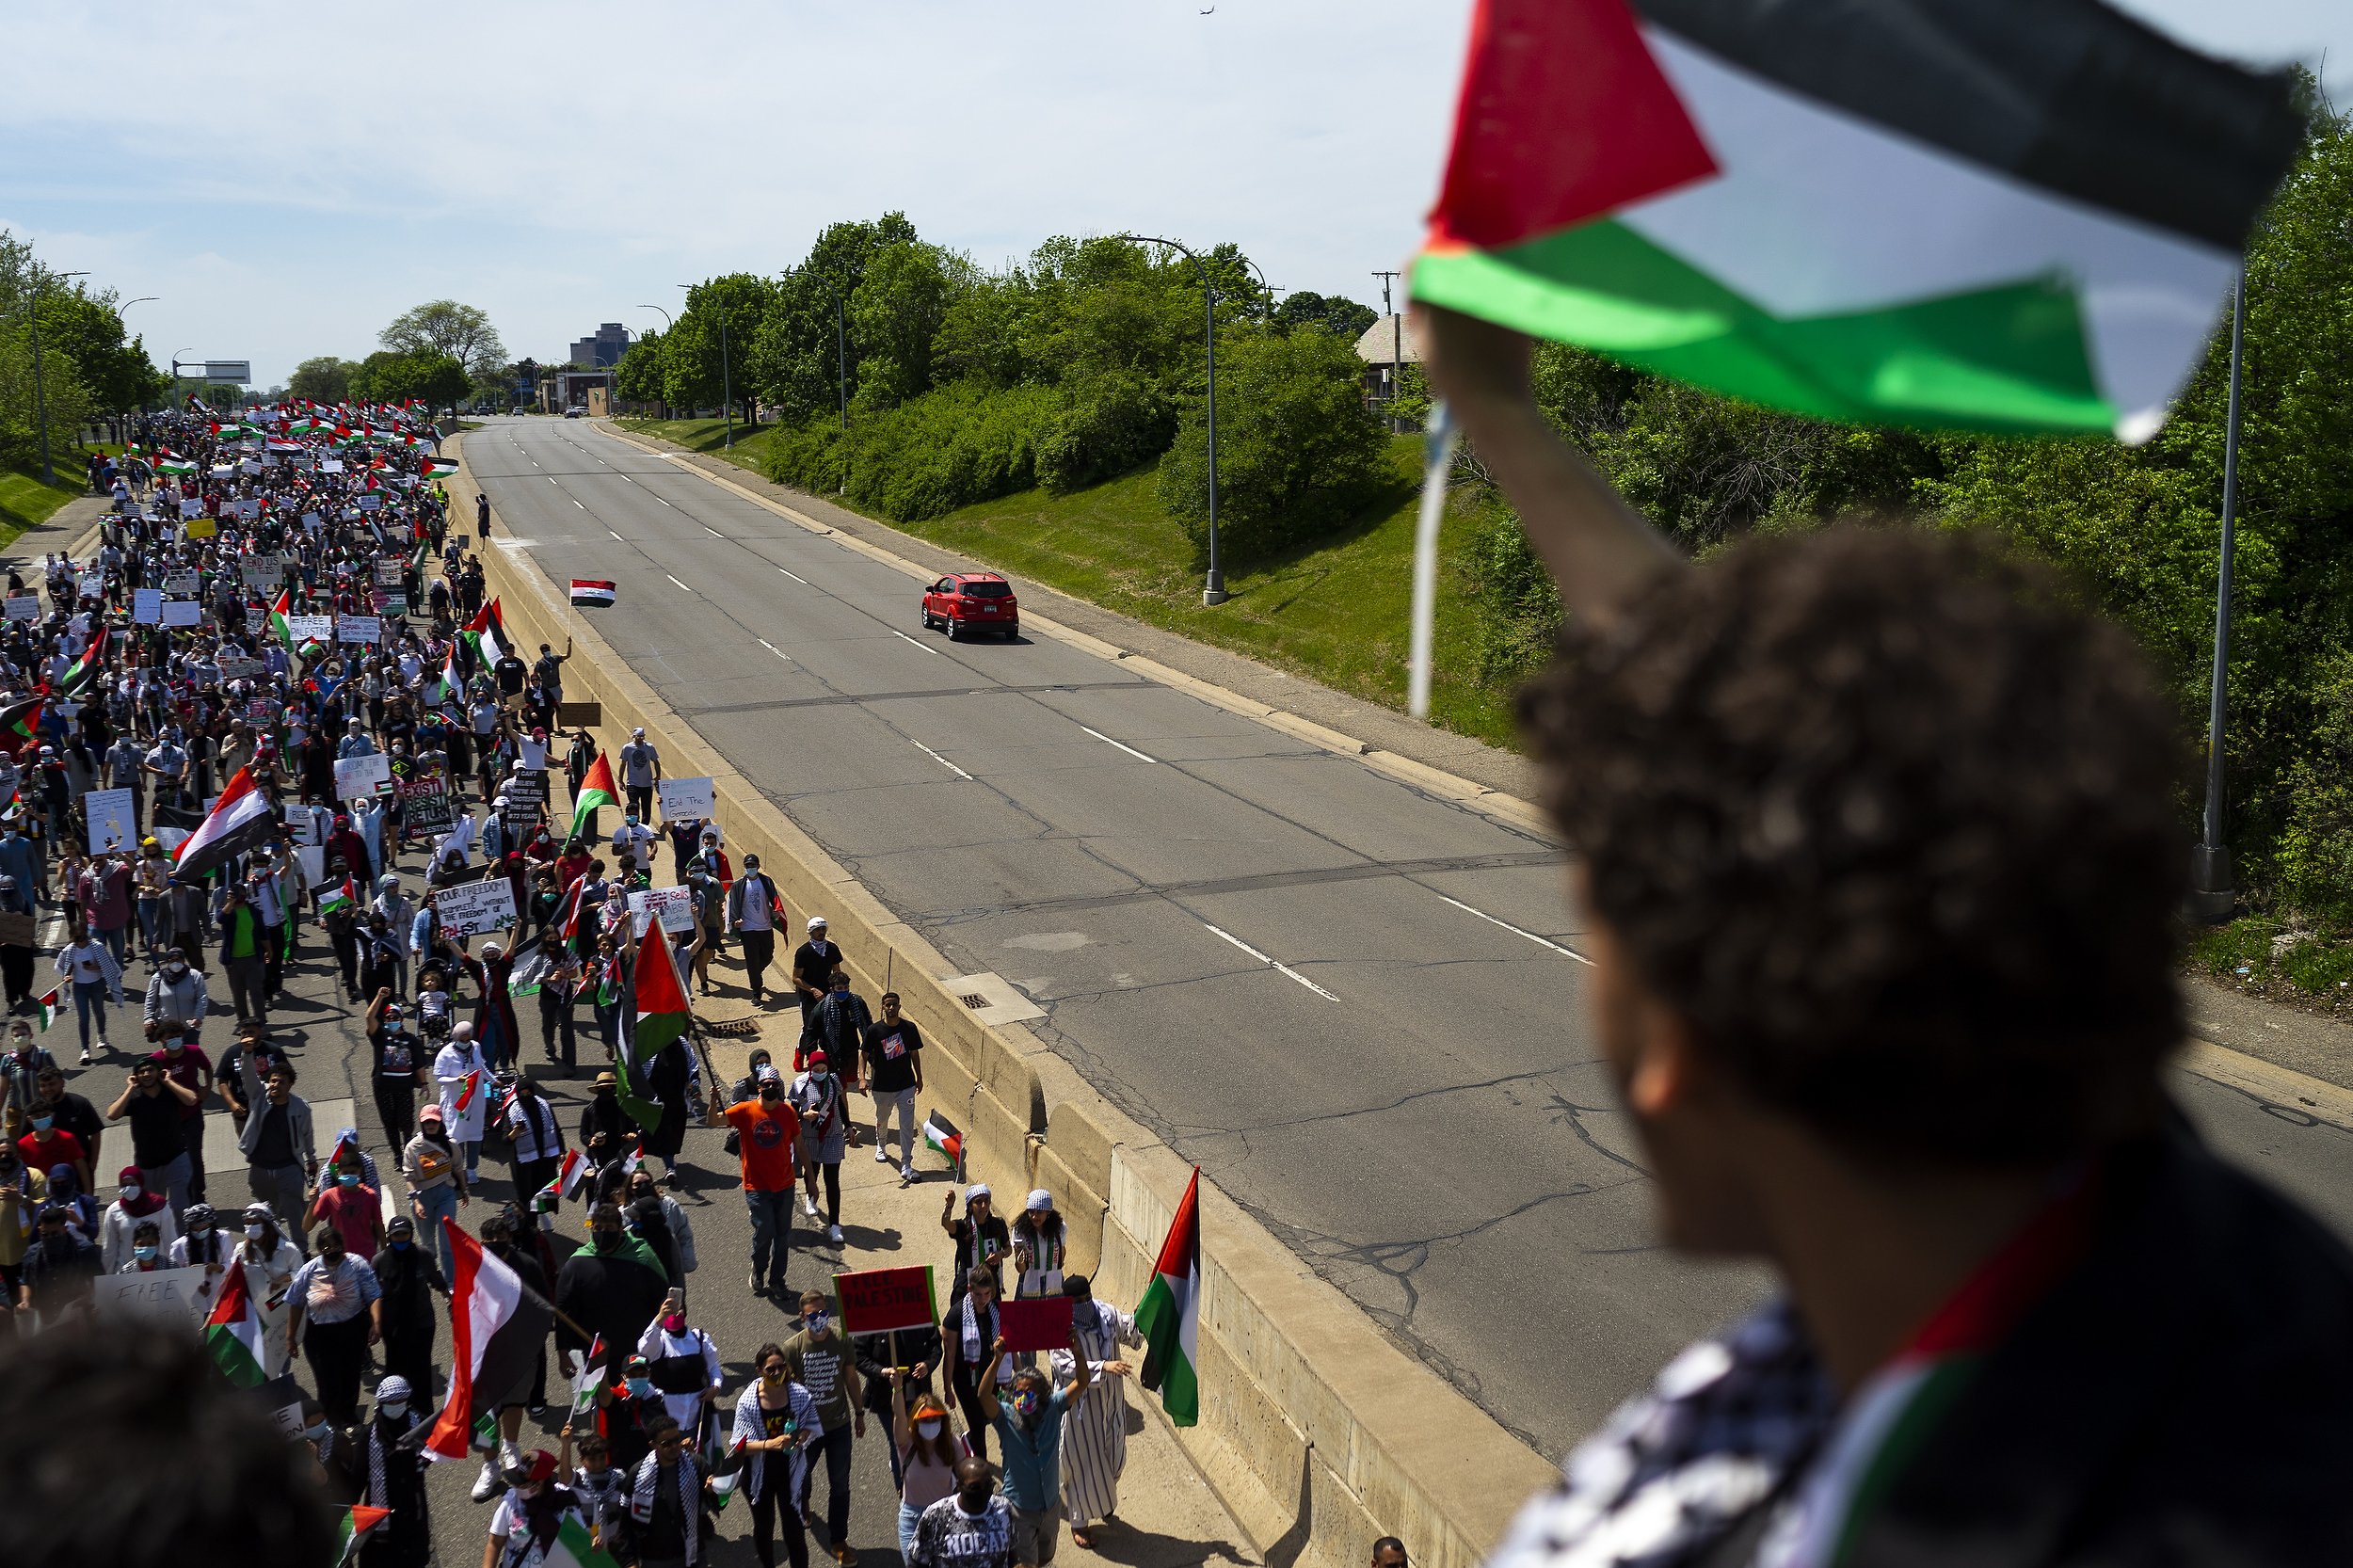  Demonstrators march down Michigan Avenue during a rally and march in support of Palestine on Tuesday, May 18, 2021, in Dearborn, Mich. The crowd was estimated to be between 2,500 to 3,000 people. Dearborn holds the highest concentration of people of